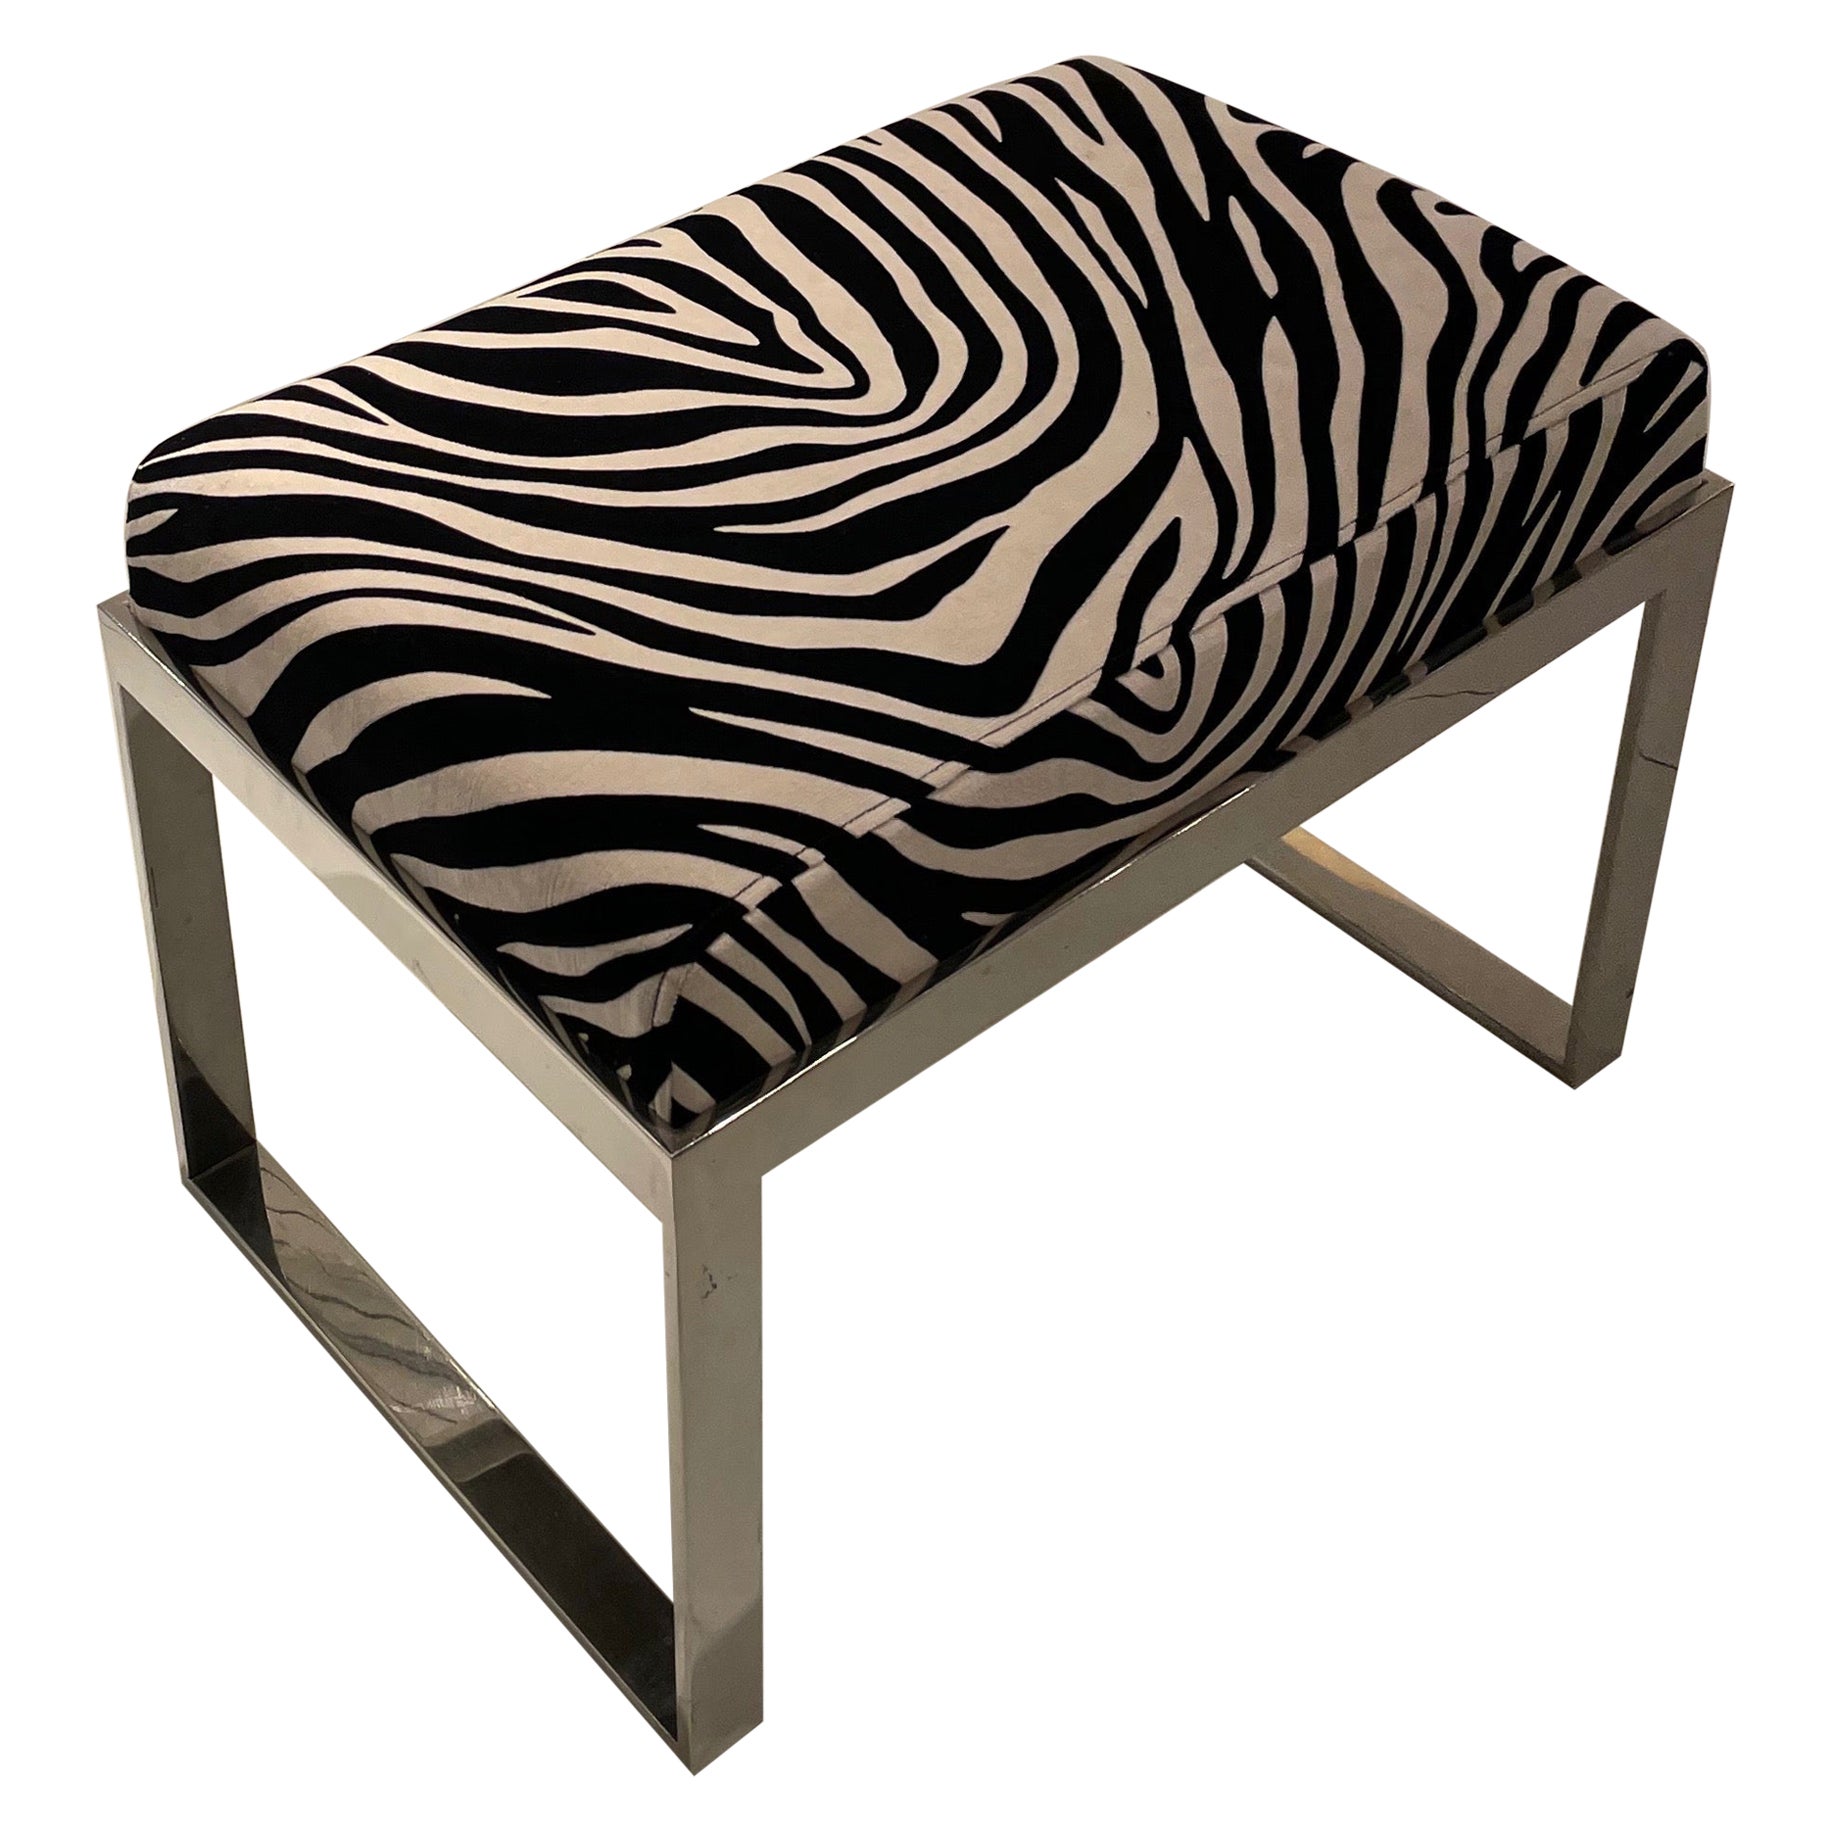 Elegant Chromed Metal Stool Covered With A Zebra Fabric, Italy 1980. For Sale